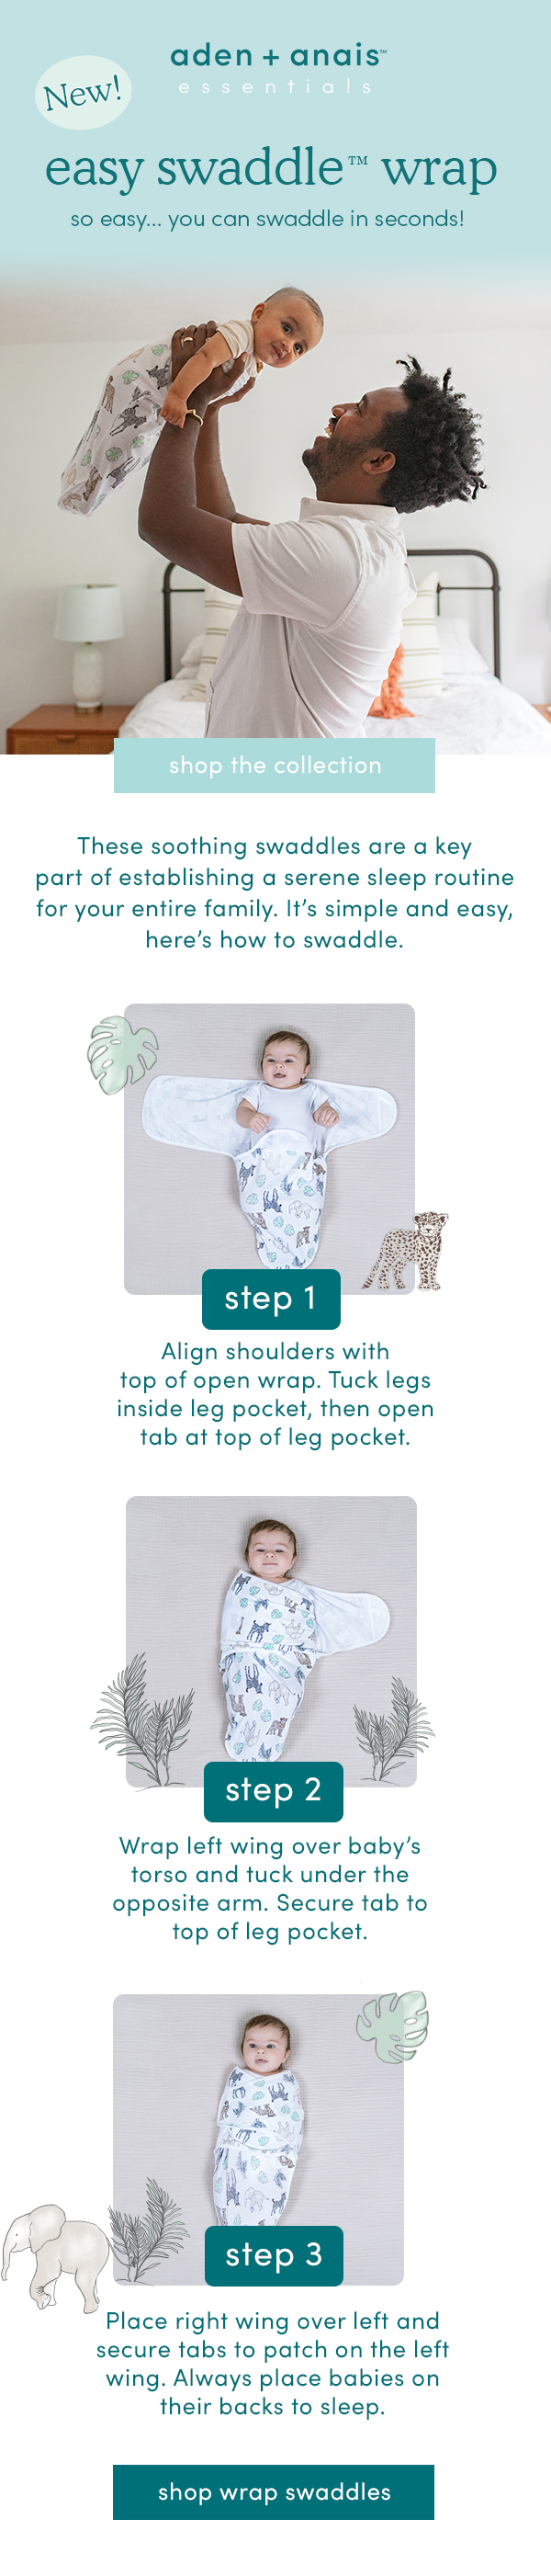 easy swaddle™ collection